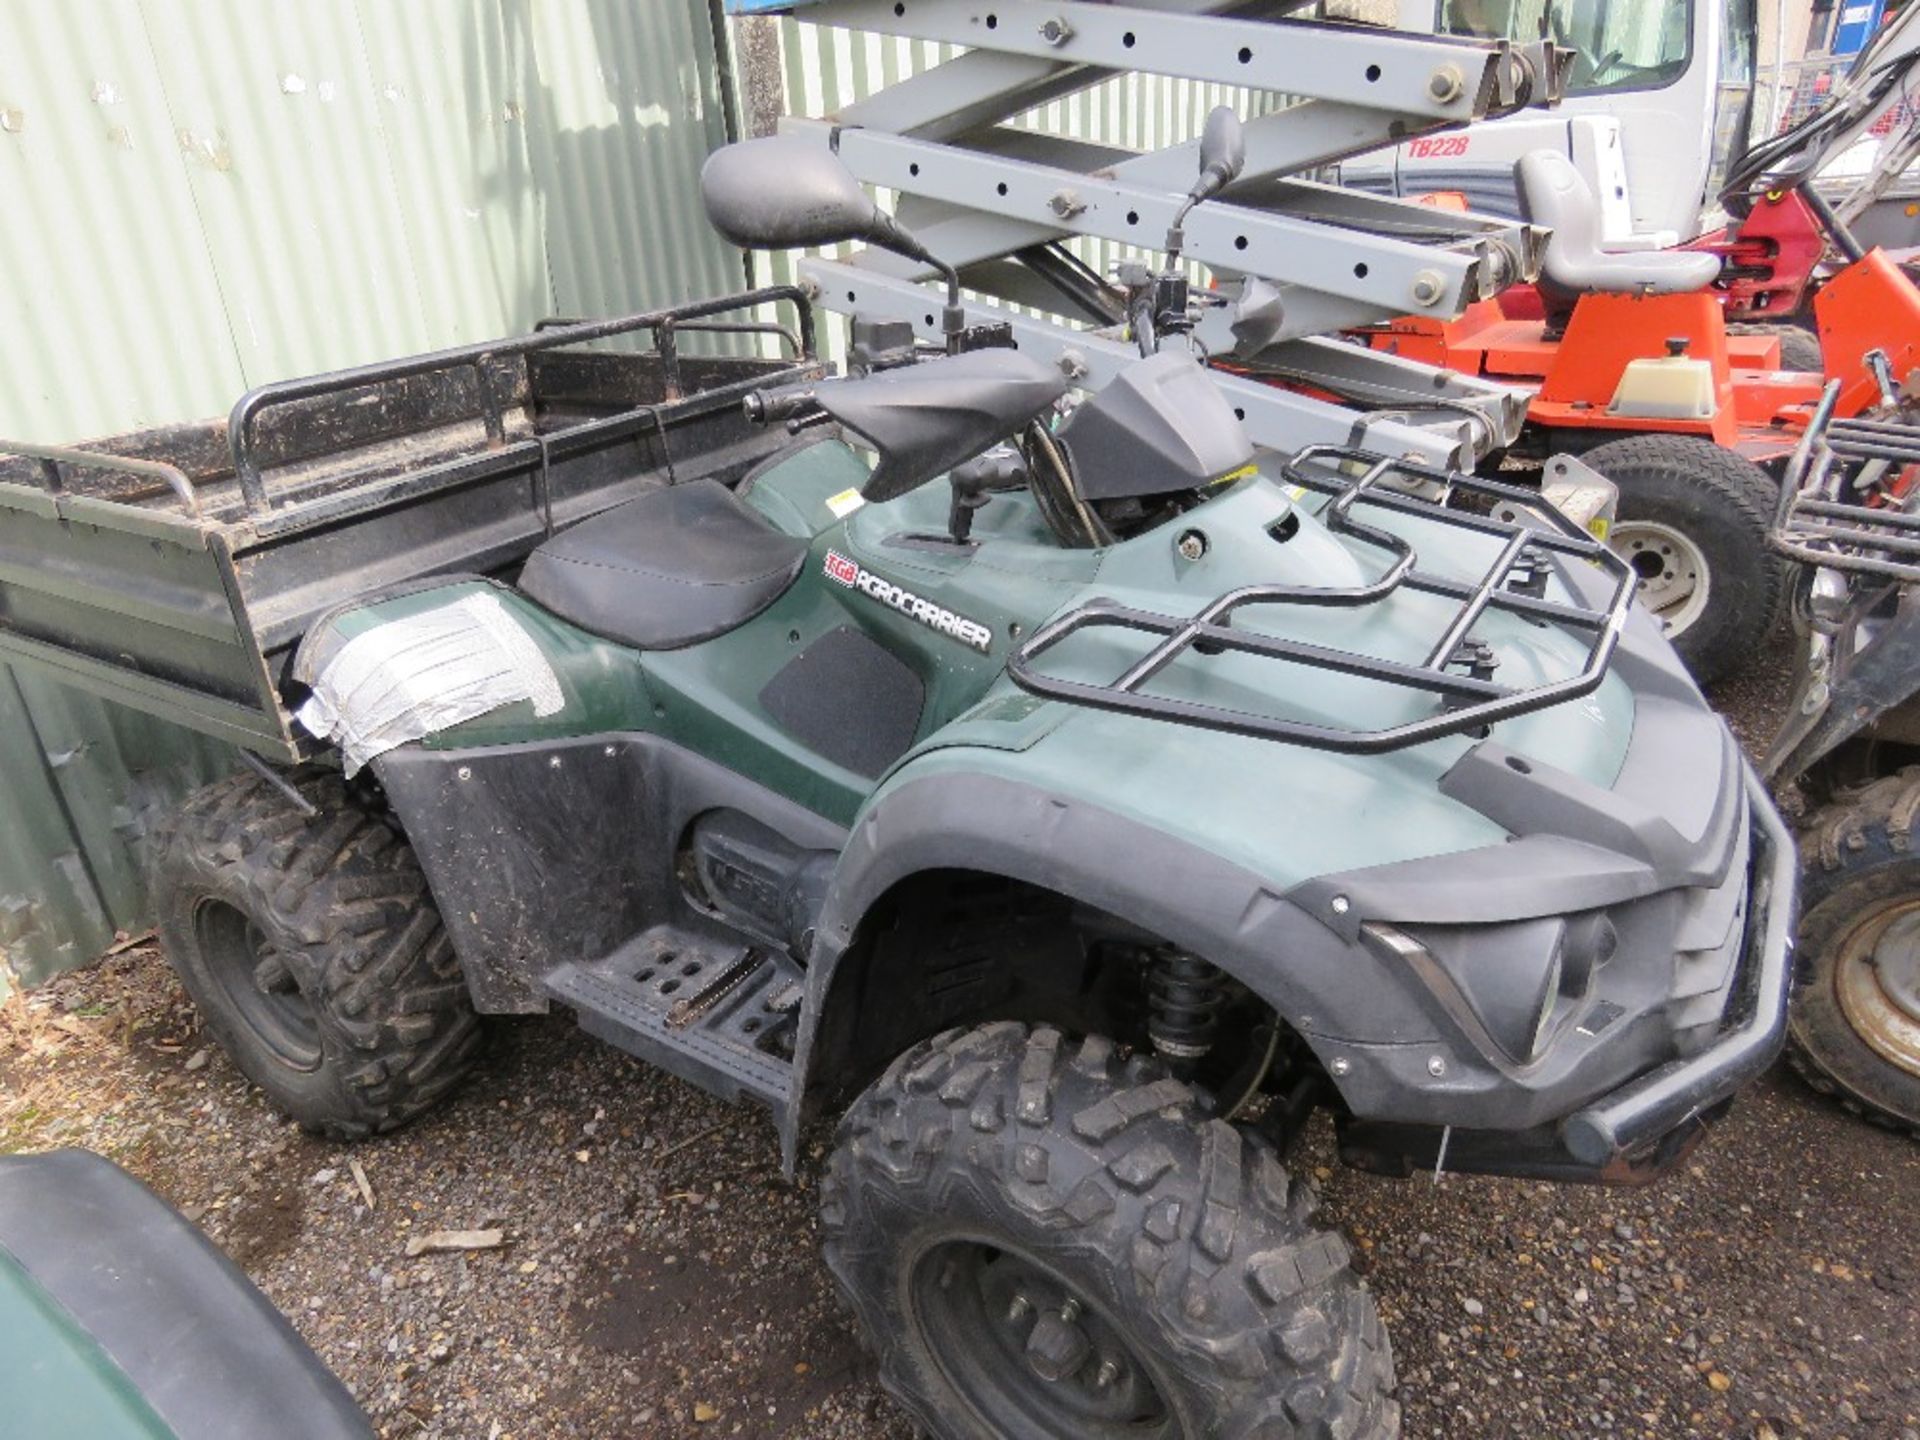 TGB AGROCARRIER FARM QUAD BIKE WITH CARRYING TRAY, 2003REC MILES, YEAR 2014. WHEN TESTED WAS SEEN